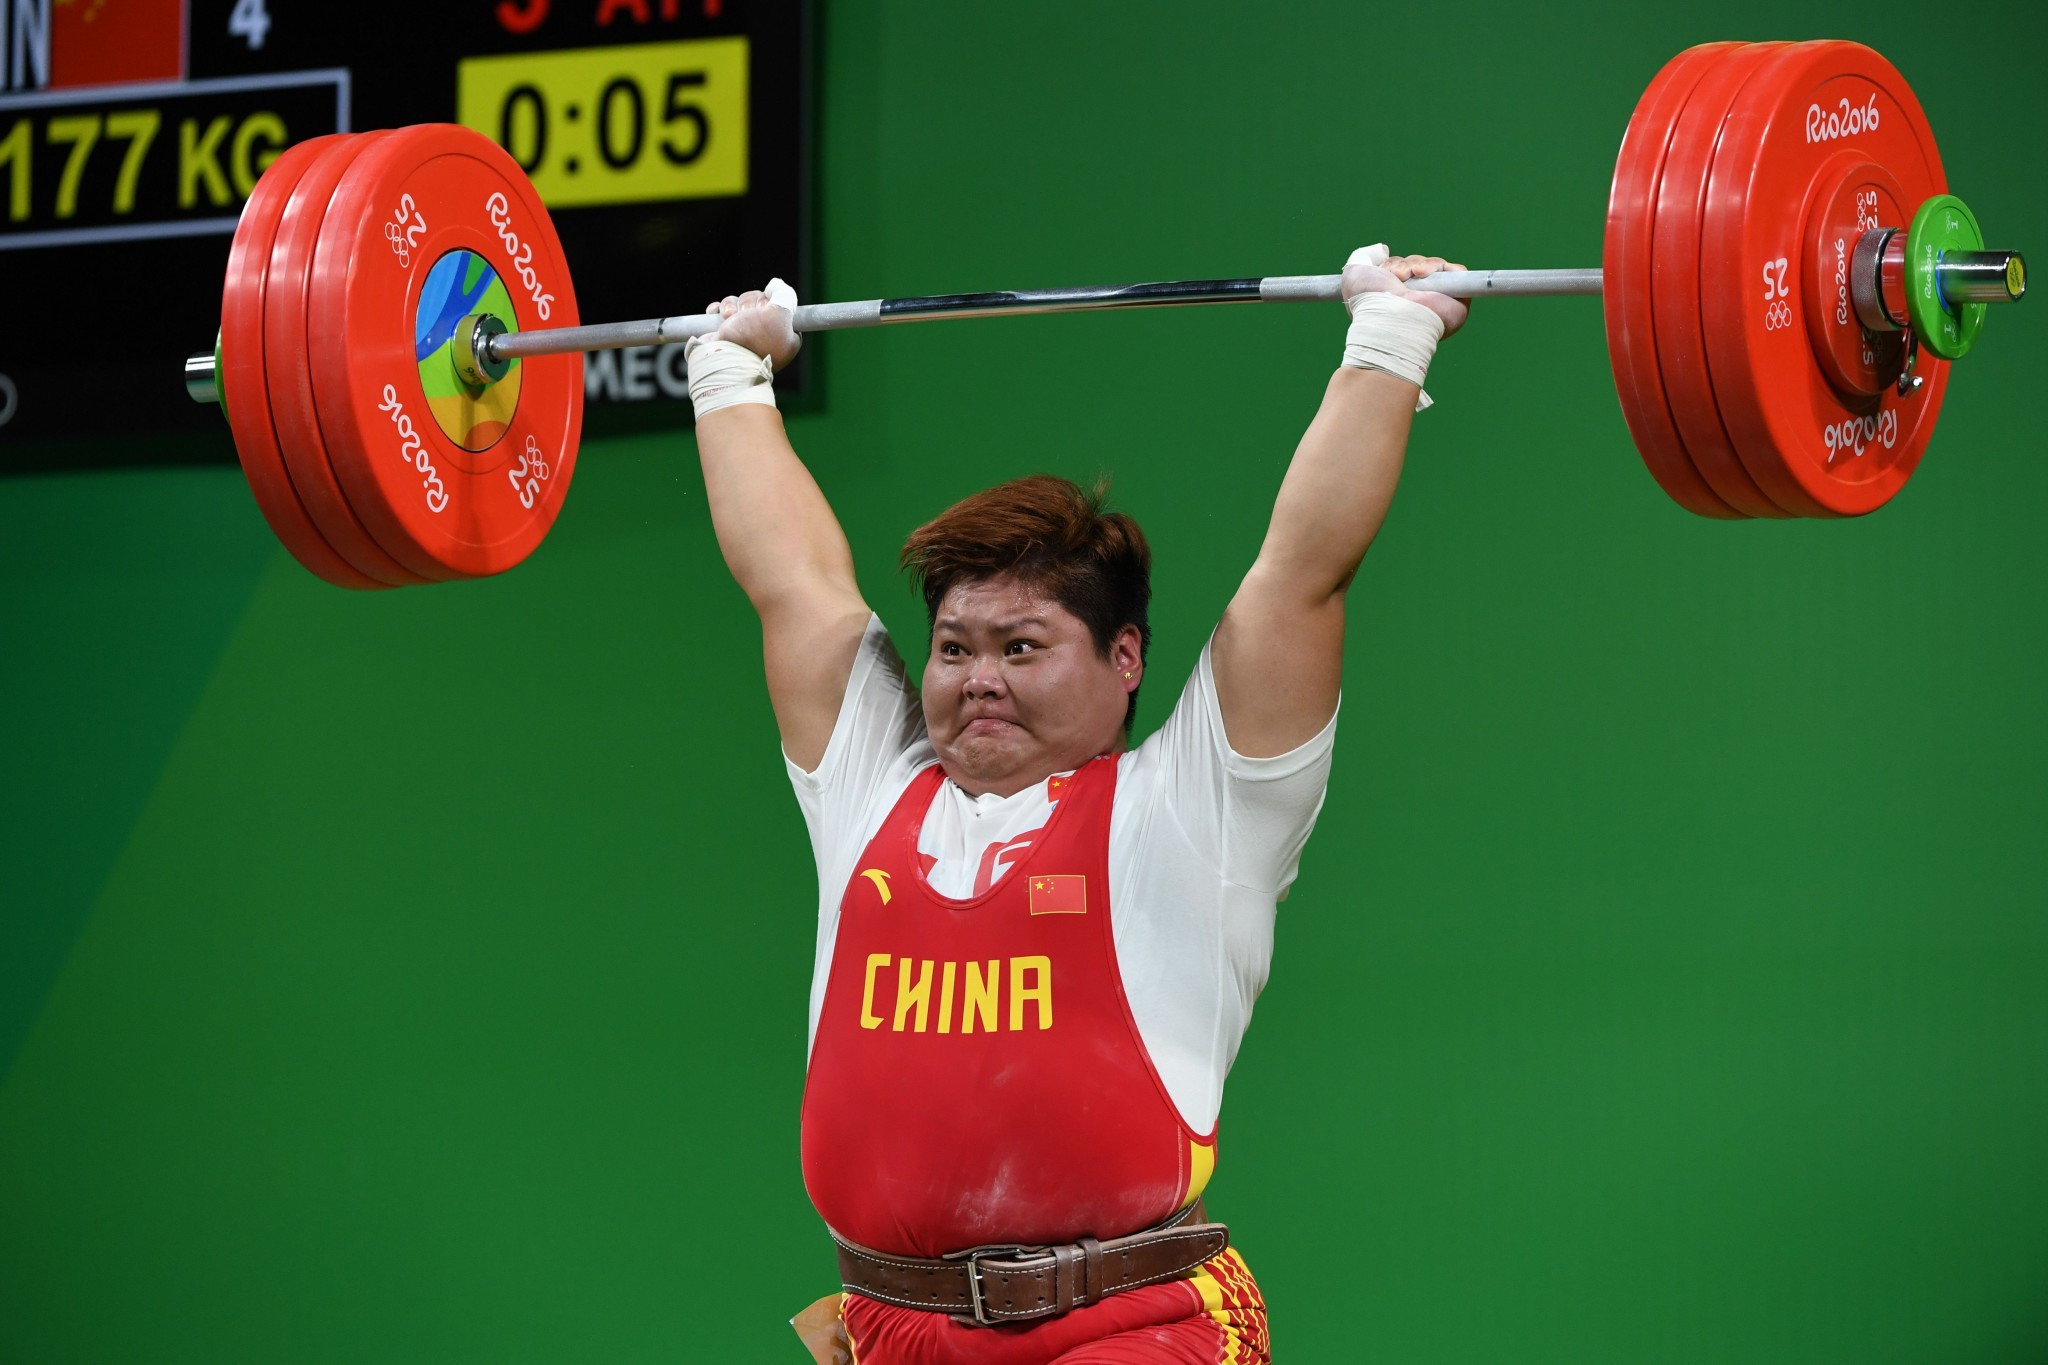 Shi Zhiyong leads way in National Games of China as as country demonstrates weightlifting dominance